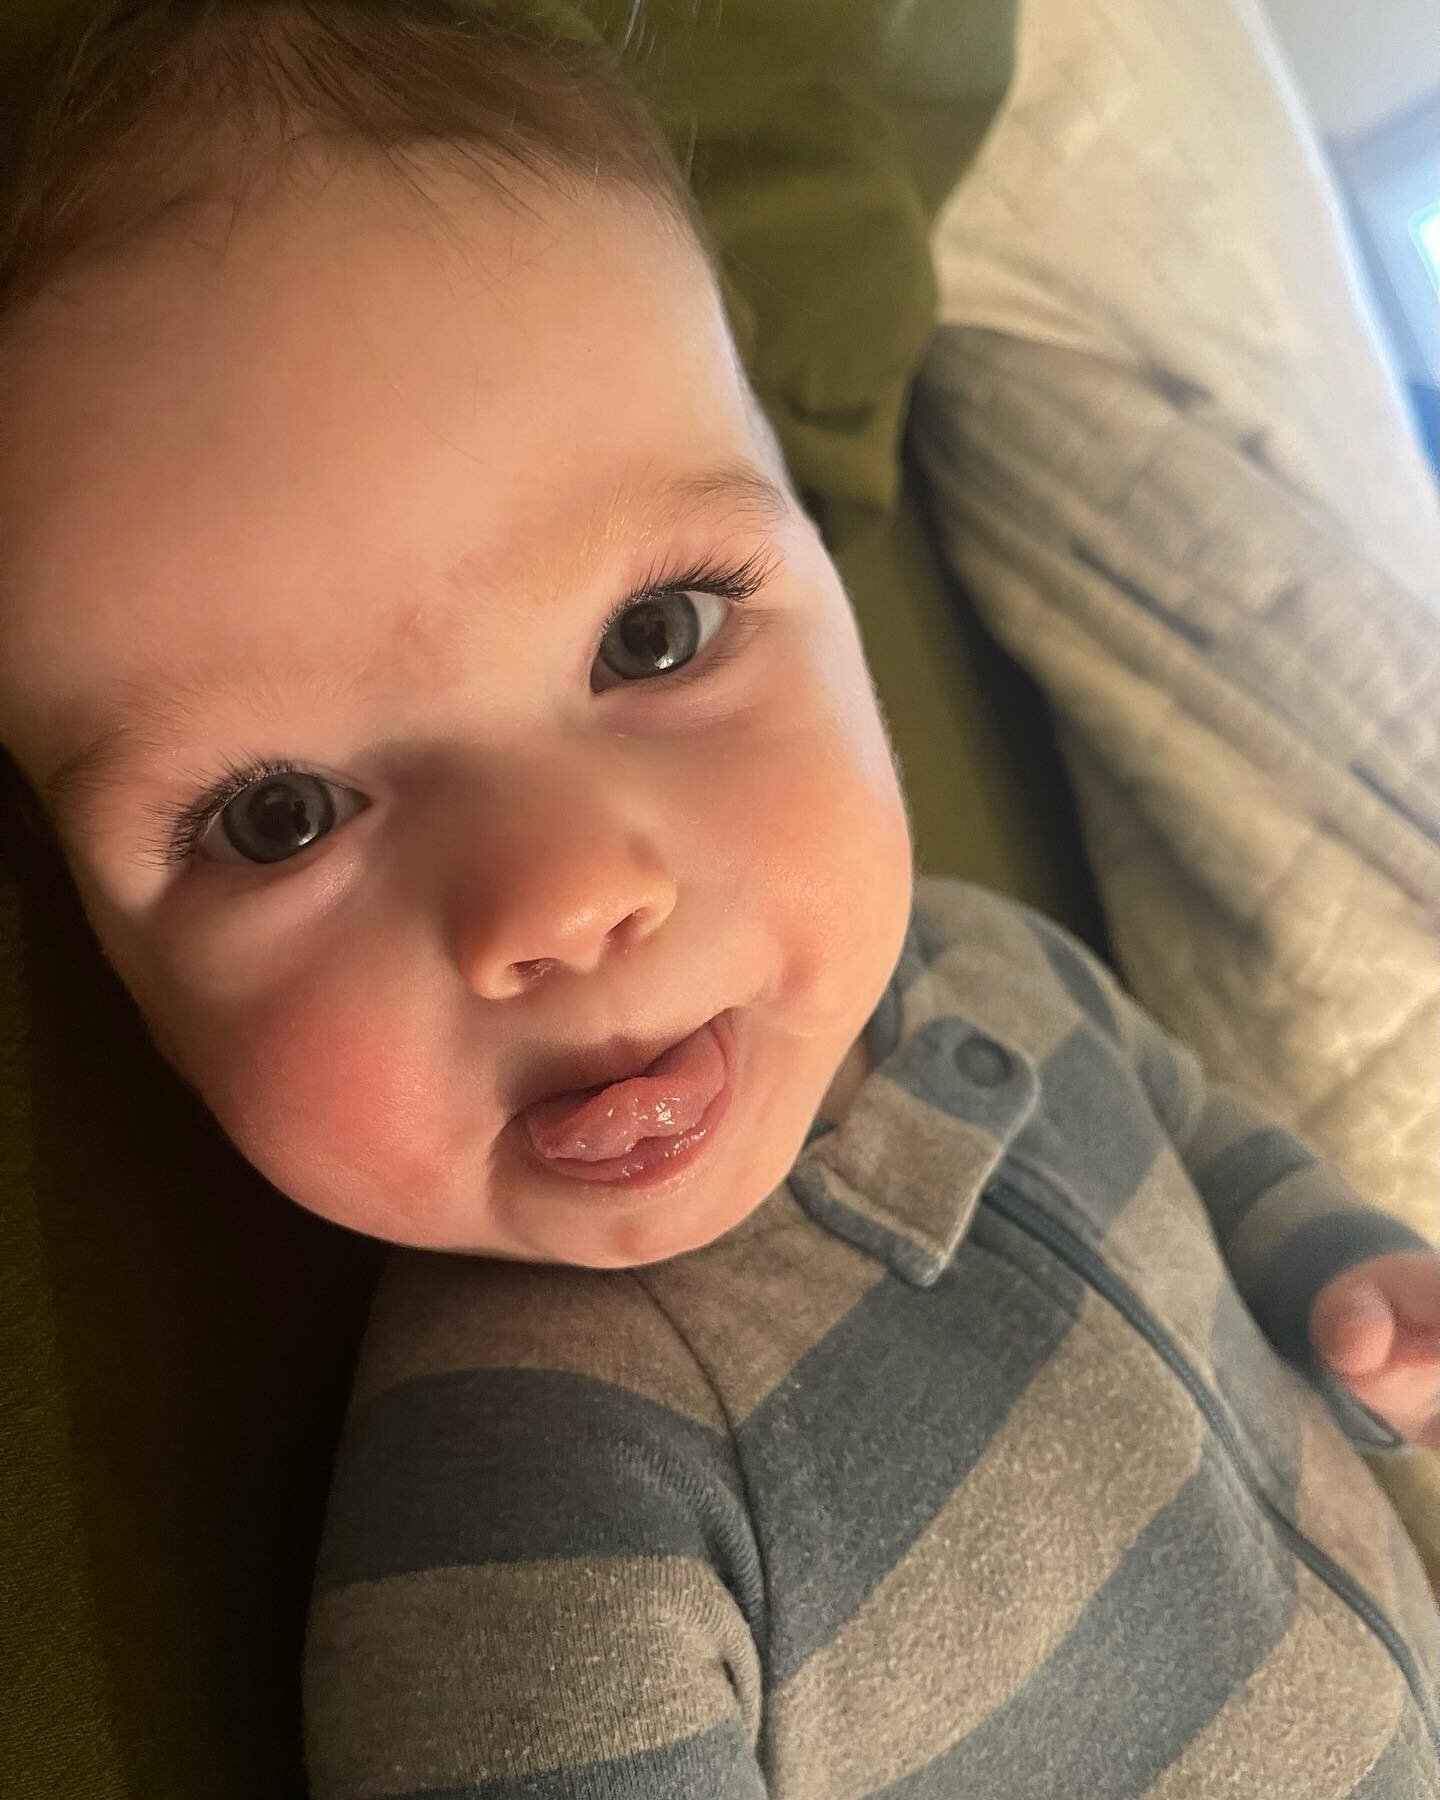 🤍 6 months of Henry 🤍 we blinked and six months flew by 🥹 our chill boy Henny starts school this week! he is the happiest, most easy going little guy you&rsquo;ll ever meet. (photo #2 says it all) His eyes are still blue, he&rsquo;s mesmerized by 